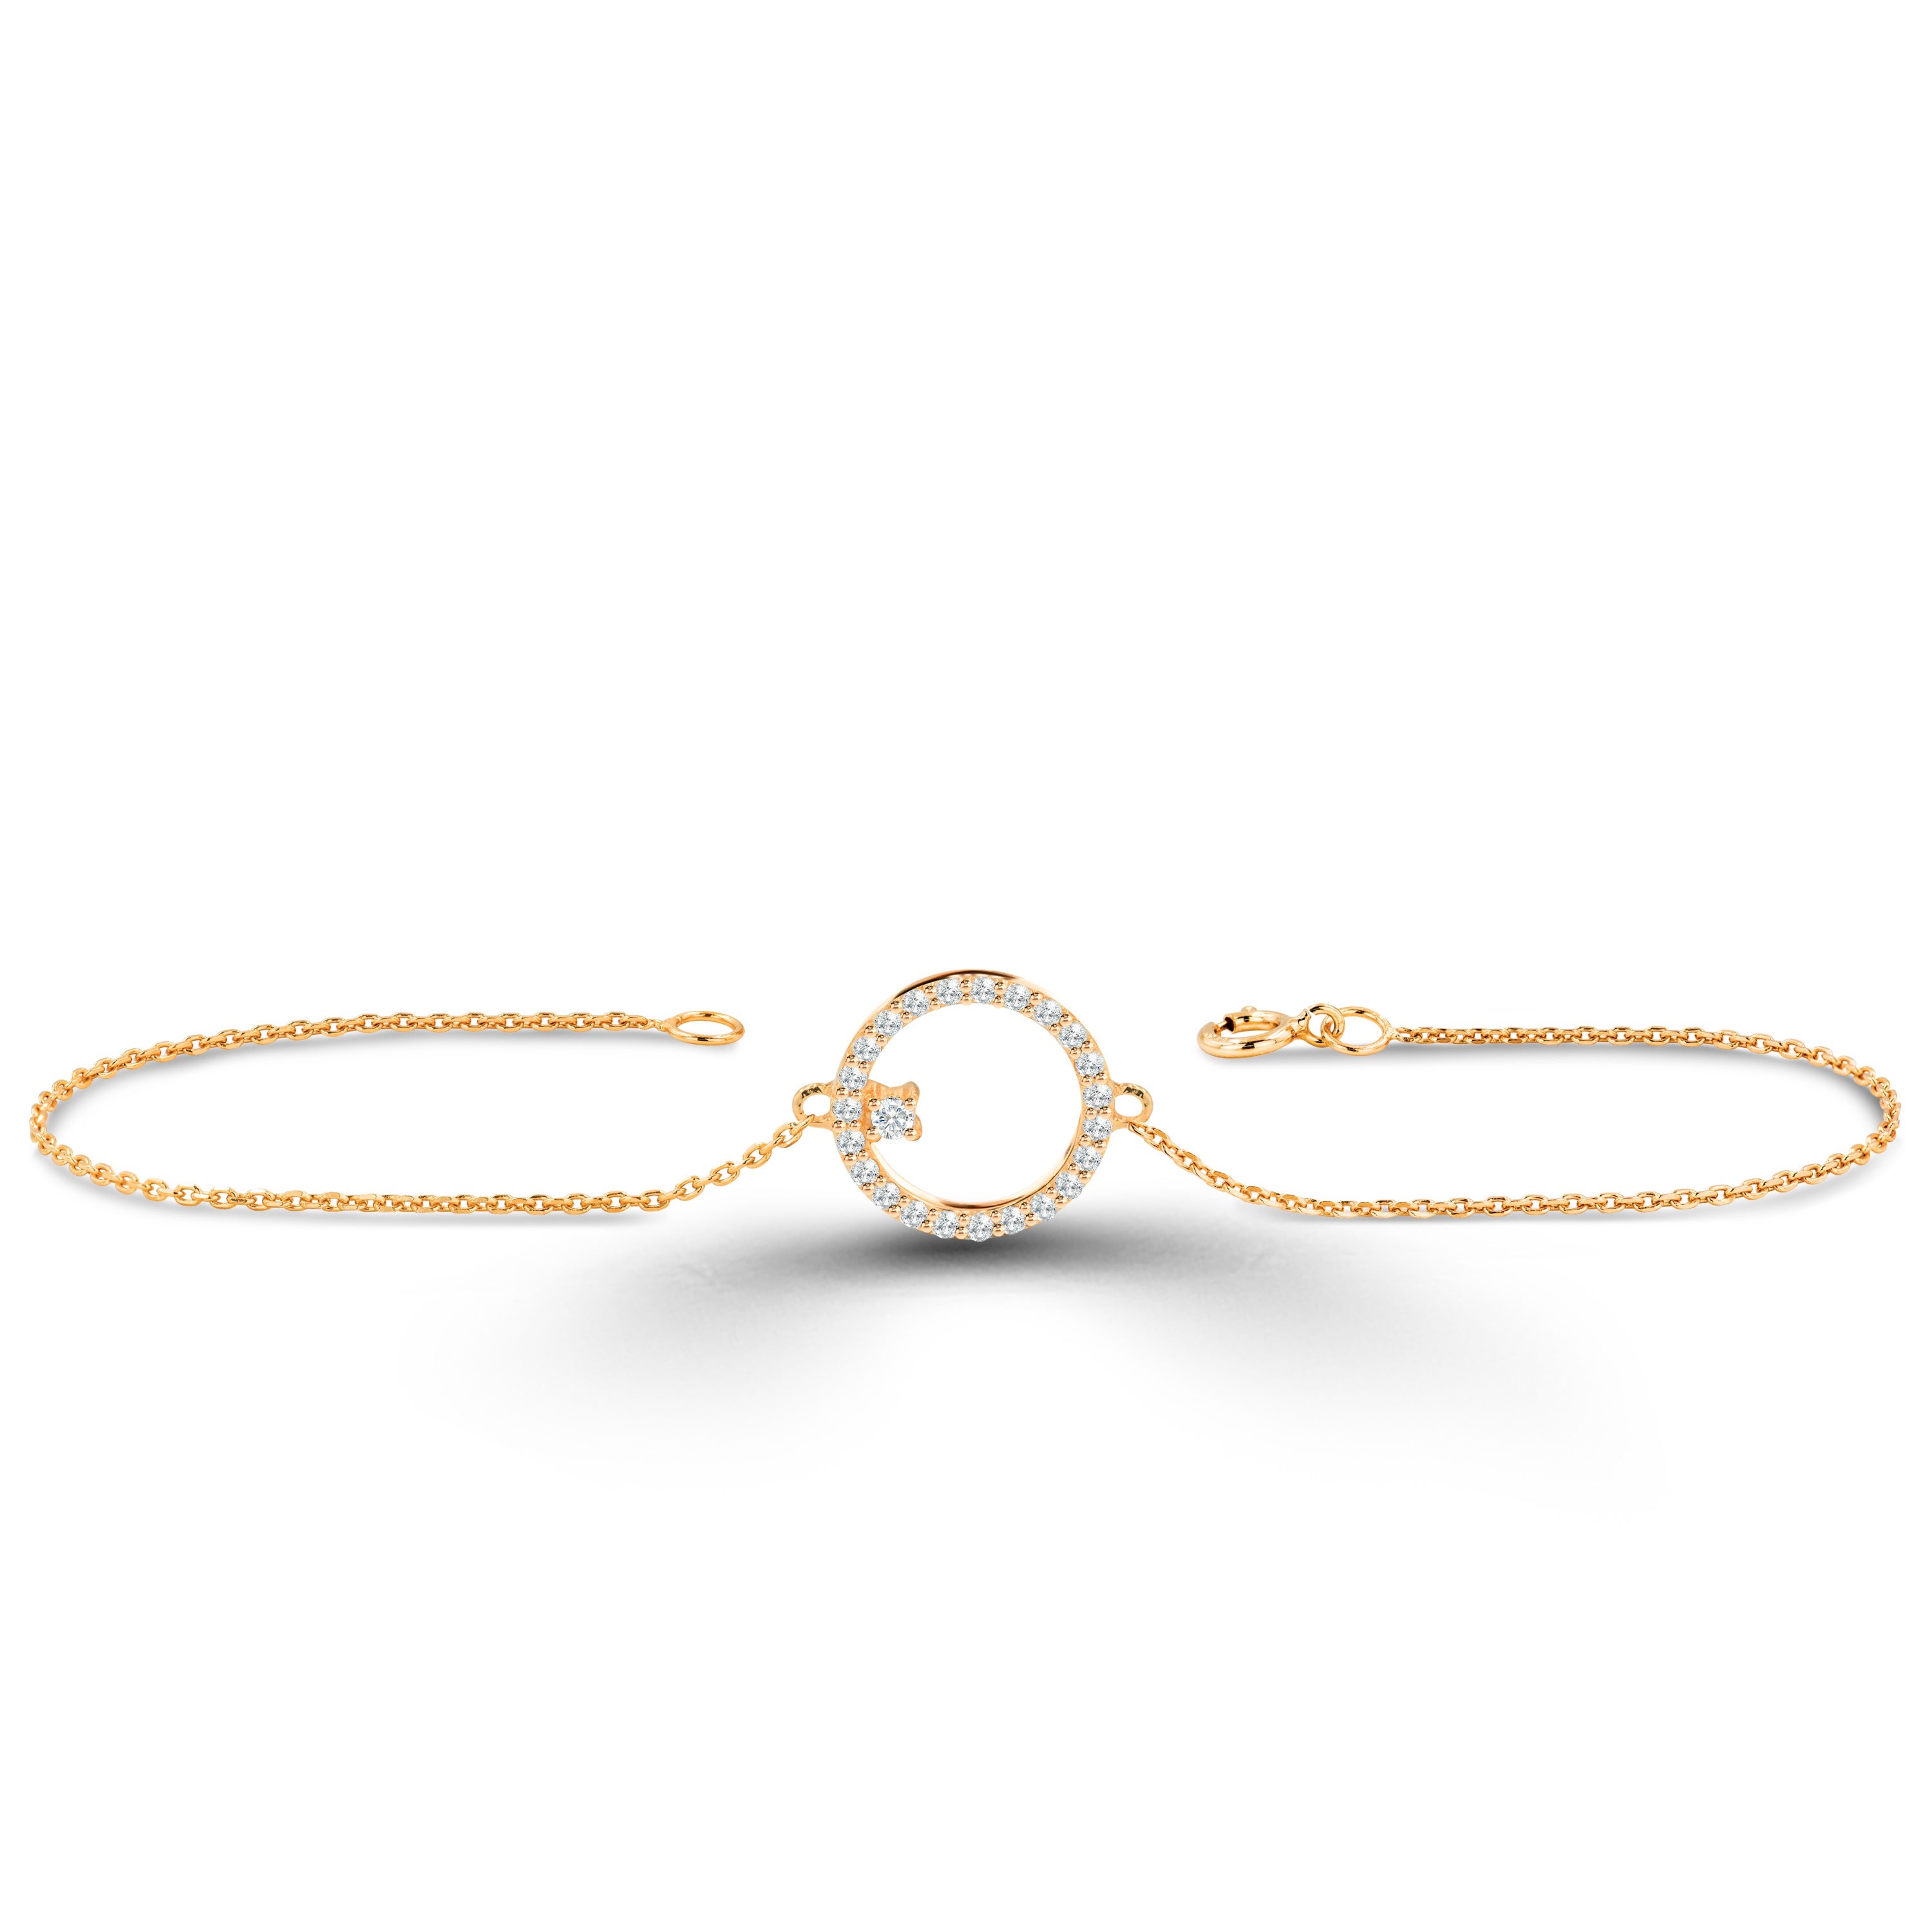 Open circle diamond bracelet with a solitaire diamond / Gold minimalist diamond bracelet / Everyday wear minimalist bracelet / Jewelry gift for her / Real natural diamonds

Cluster bracelet, open circle bracelet, circle diamond, pave circle